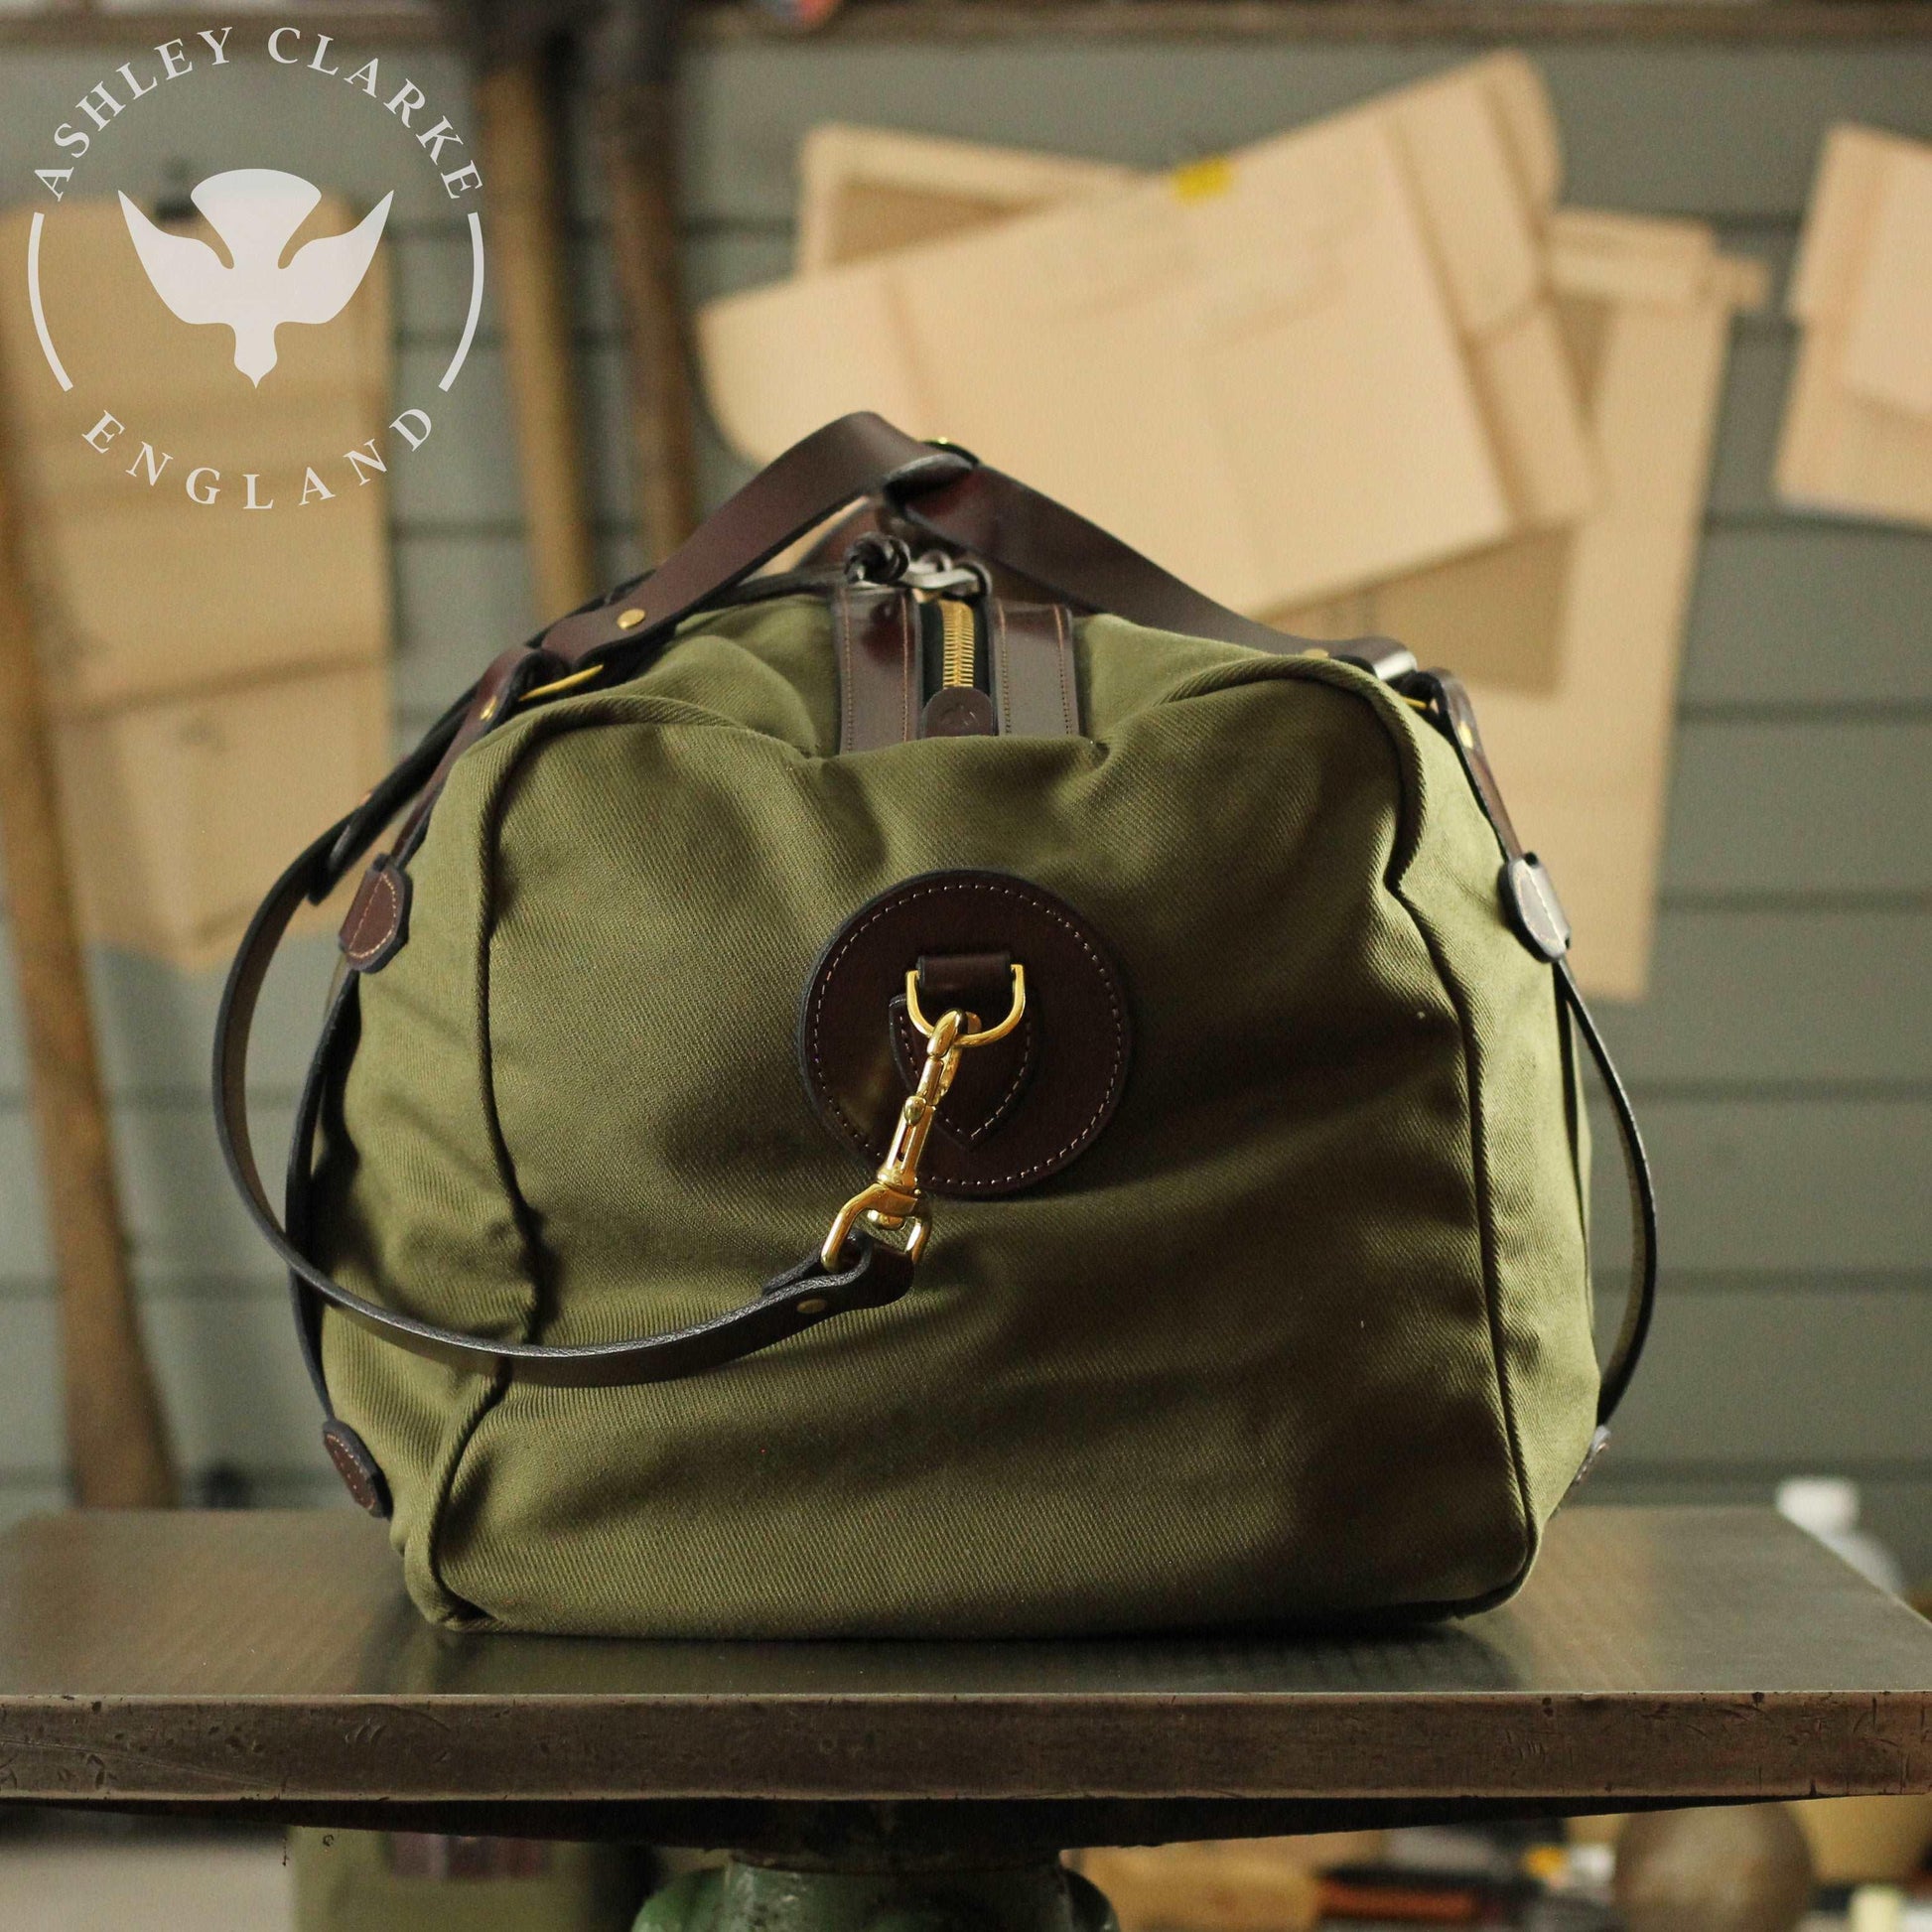 a green waxed canvas holdall bag by ashley clarke england on top of a table 4